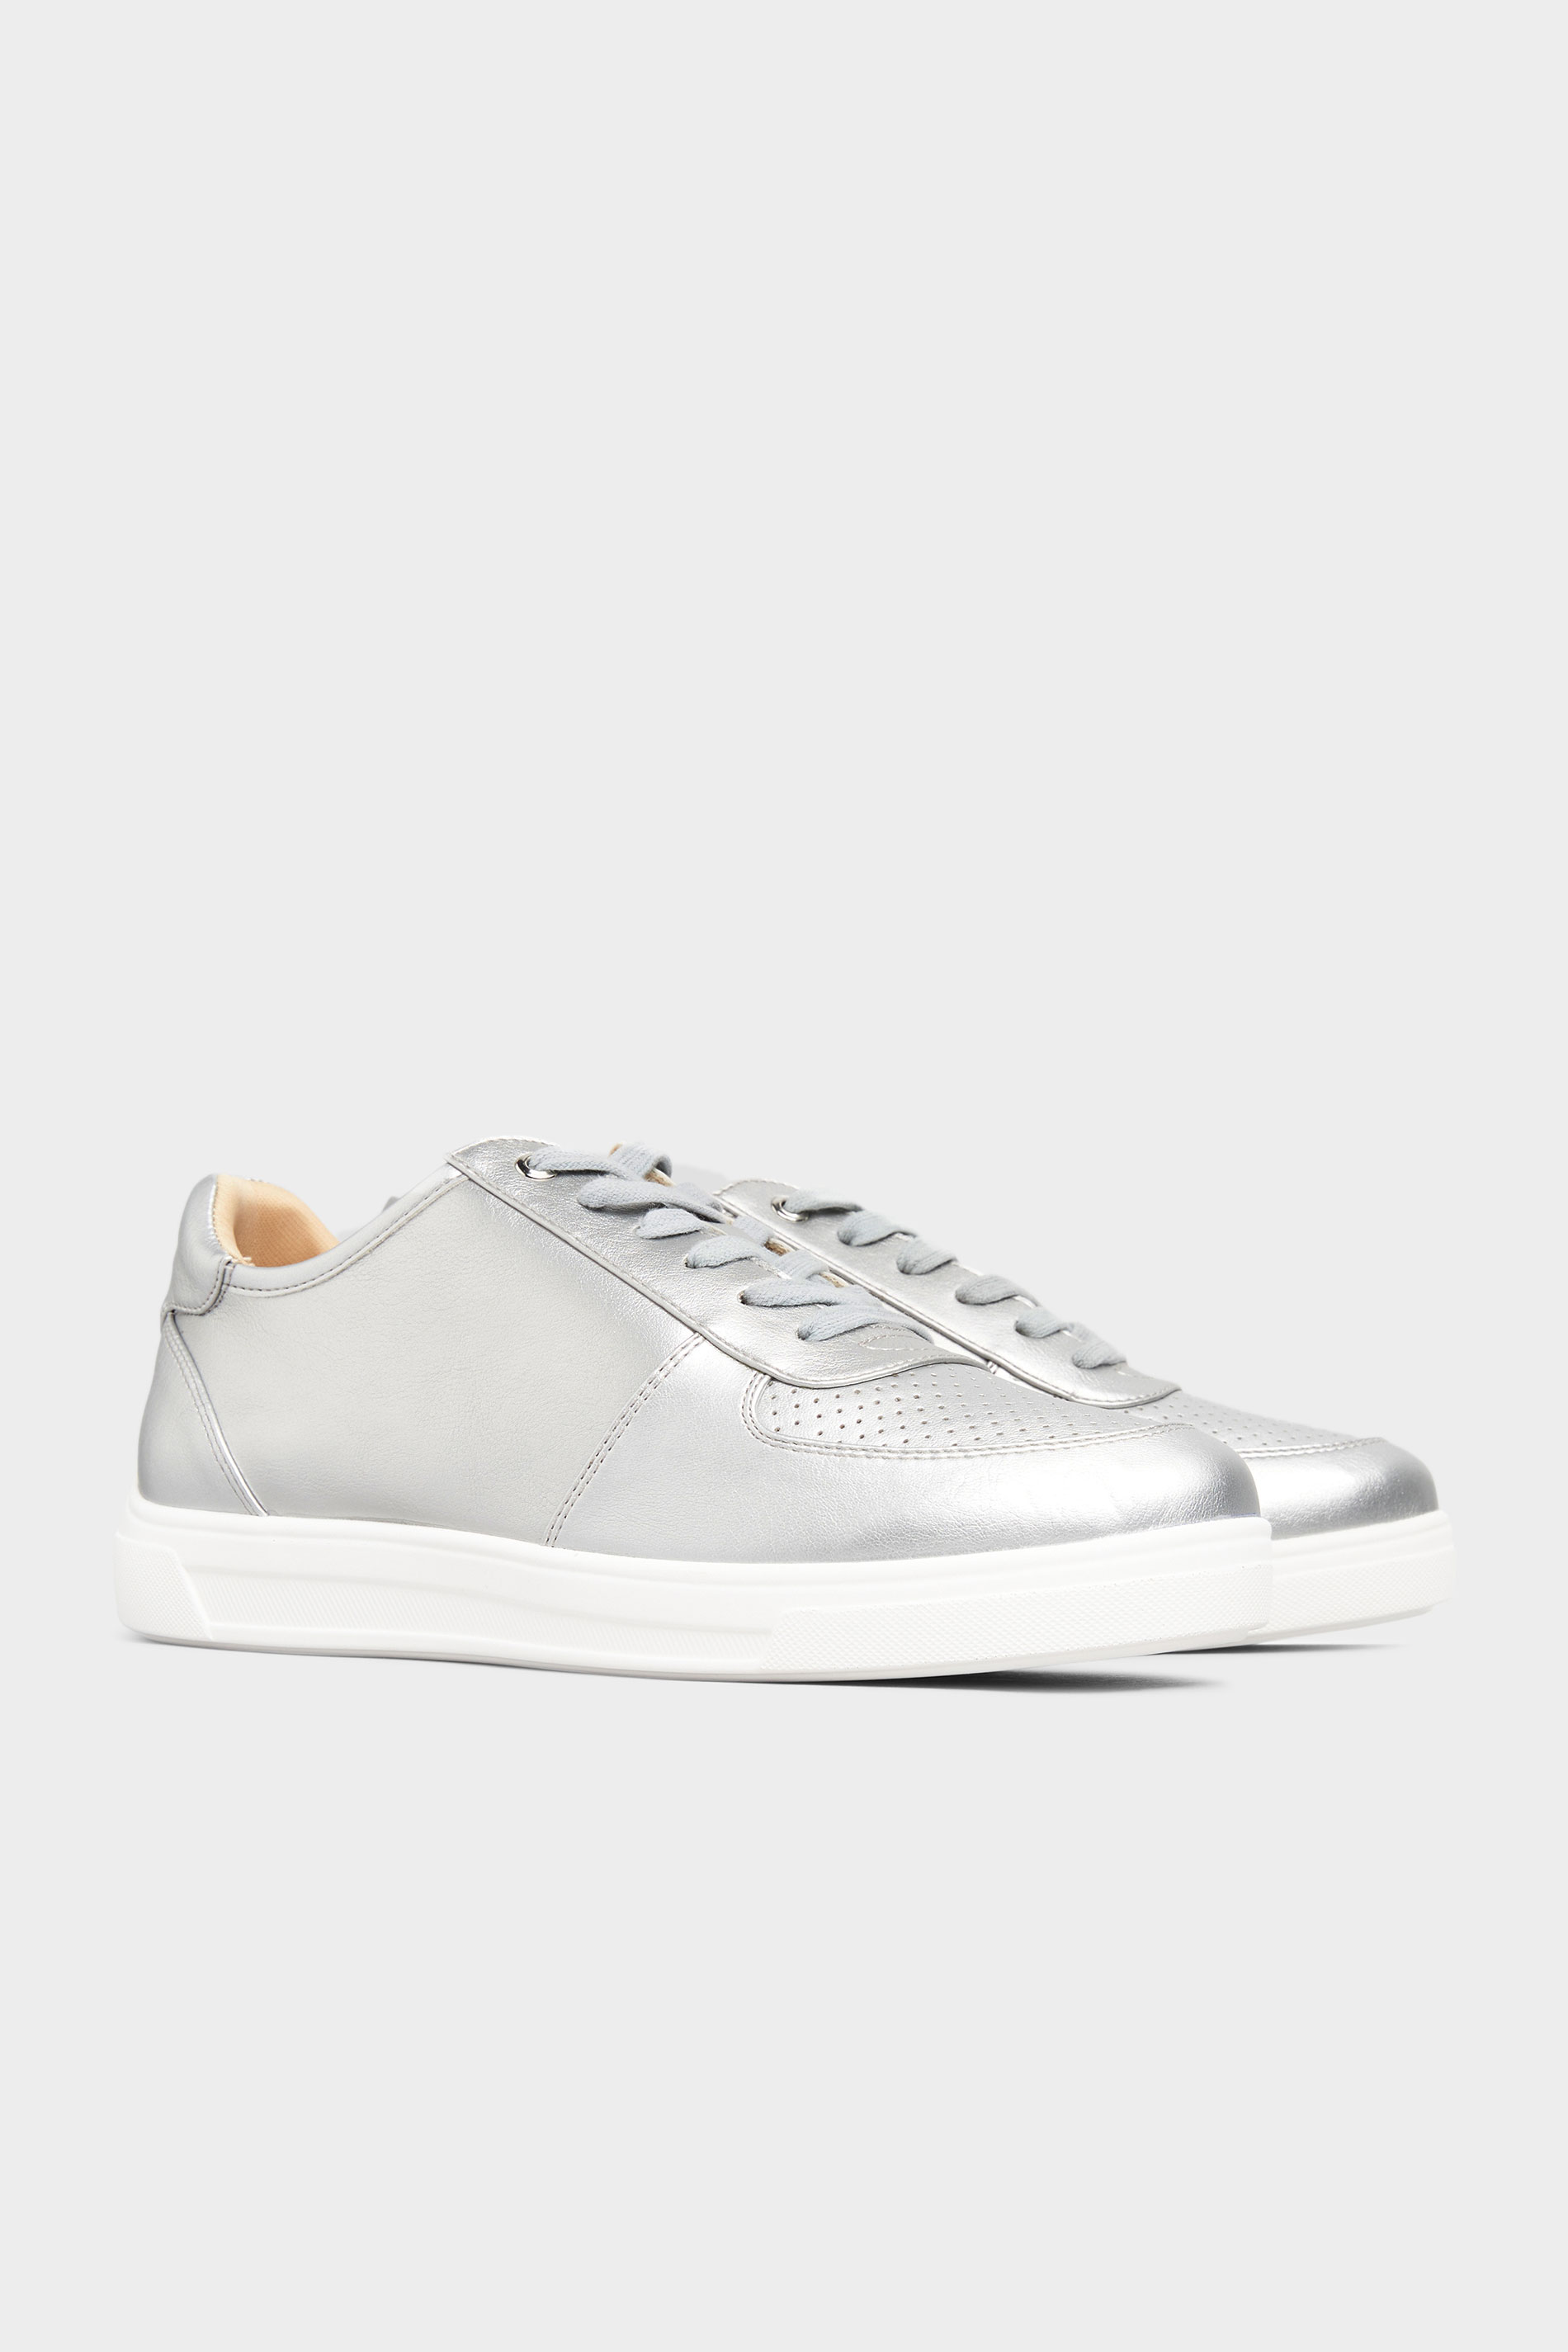 Silver Vegan Leather Lace Up Trainers In Extra Wide Fit_B.jpg